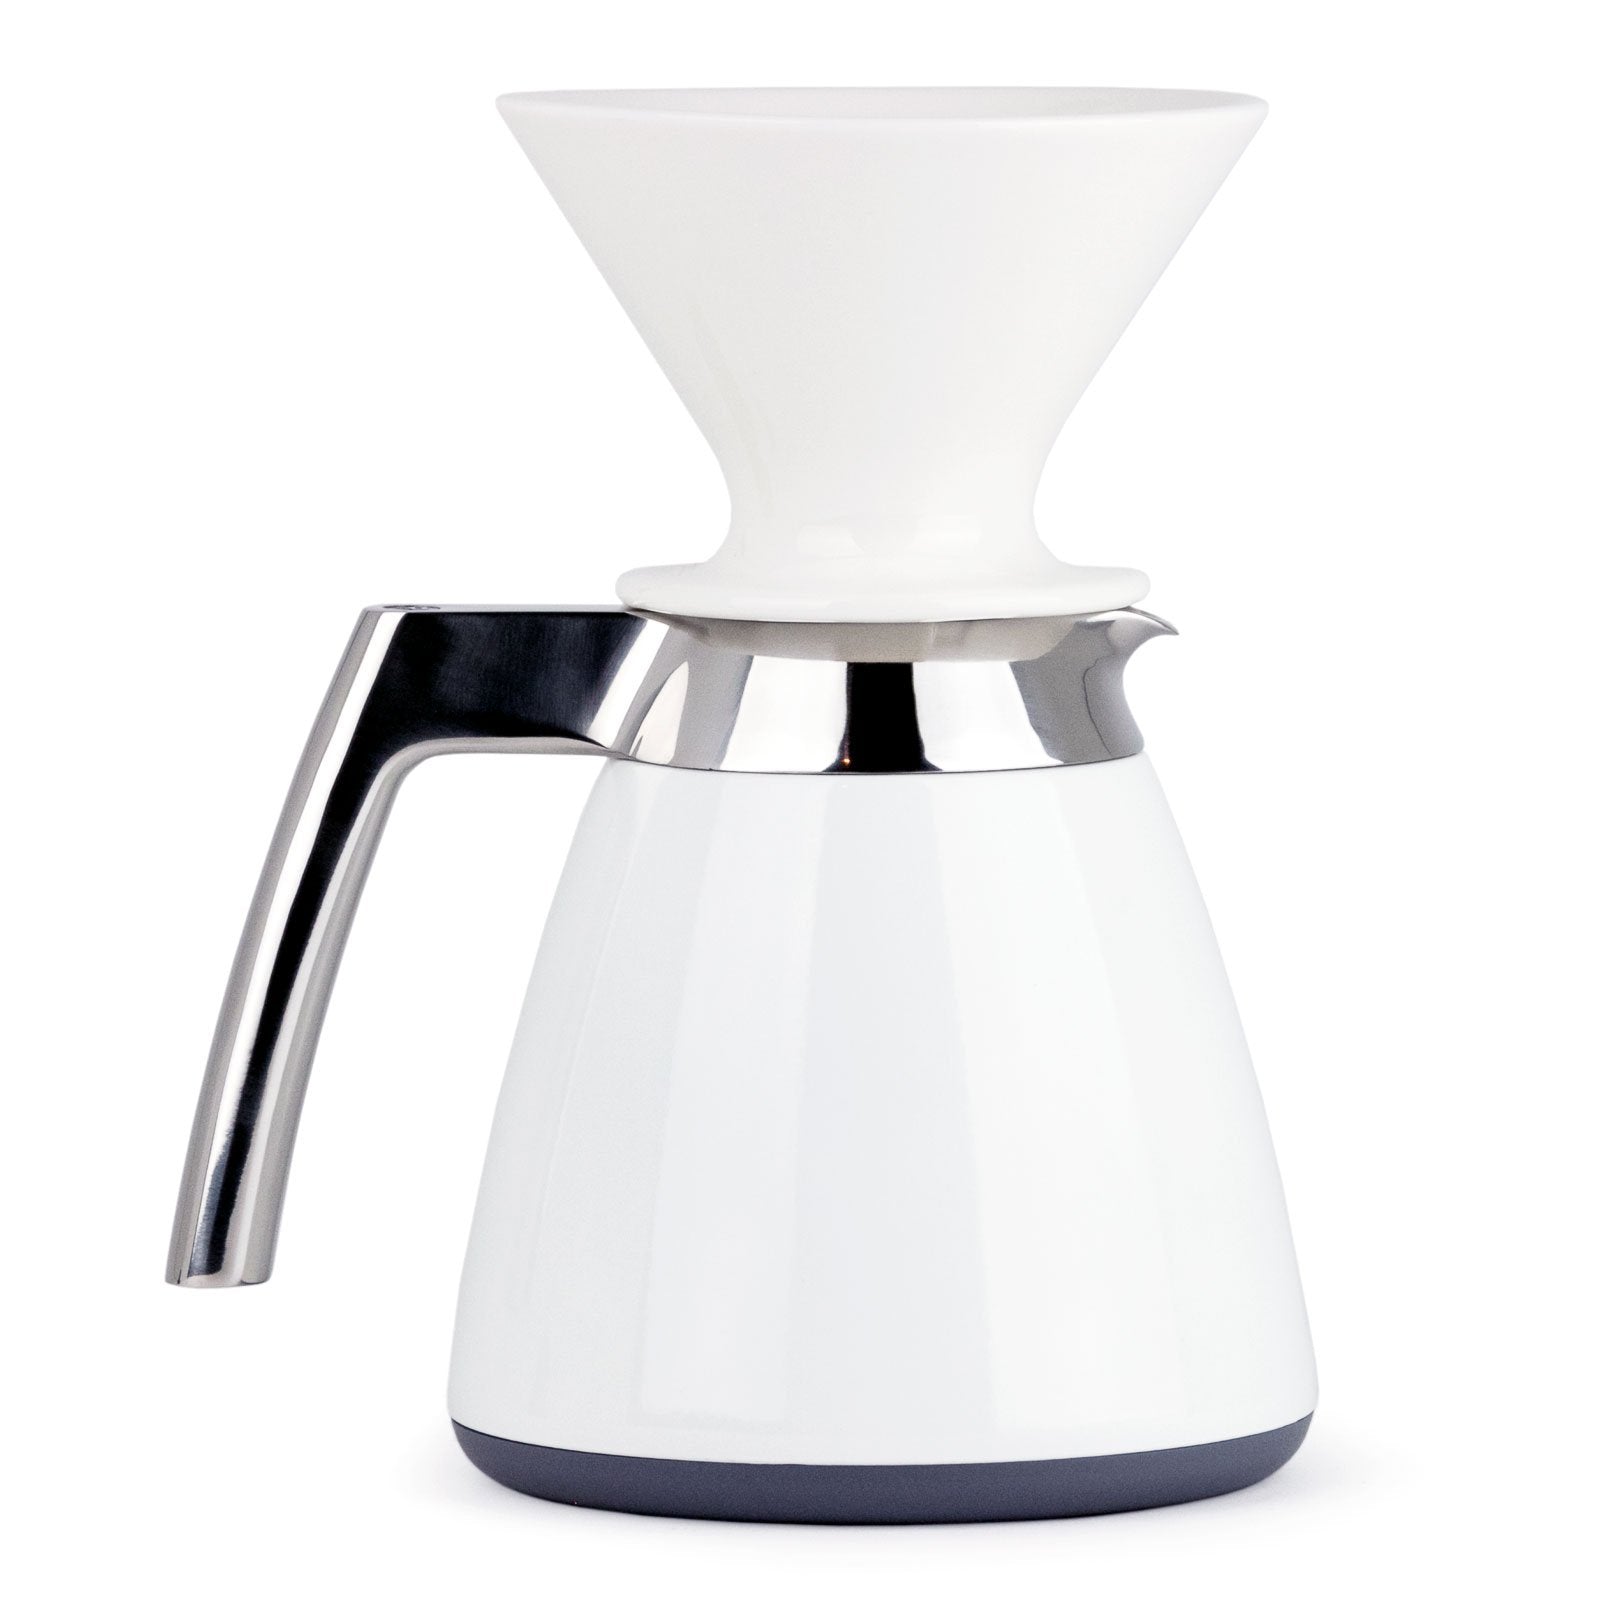 https://clivecoffee.com/cdn/shop/products/Ratio-Thermal-Carafe-White-With-Dripper.jpg?v=1601396681&width=1600